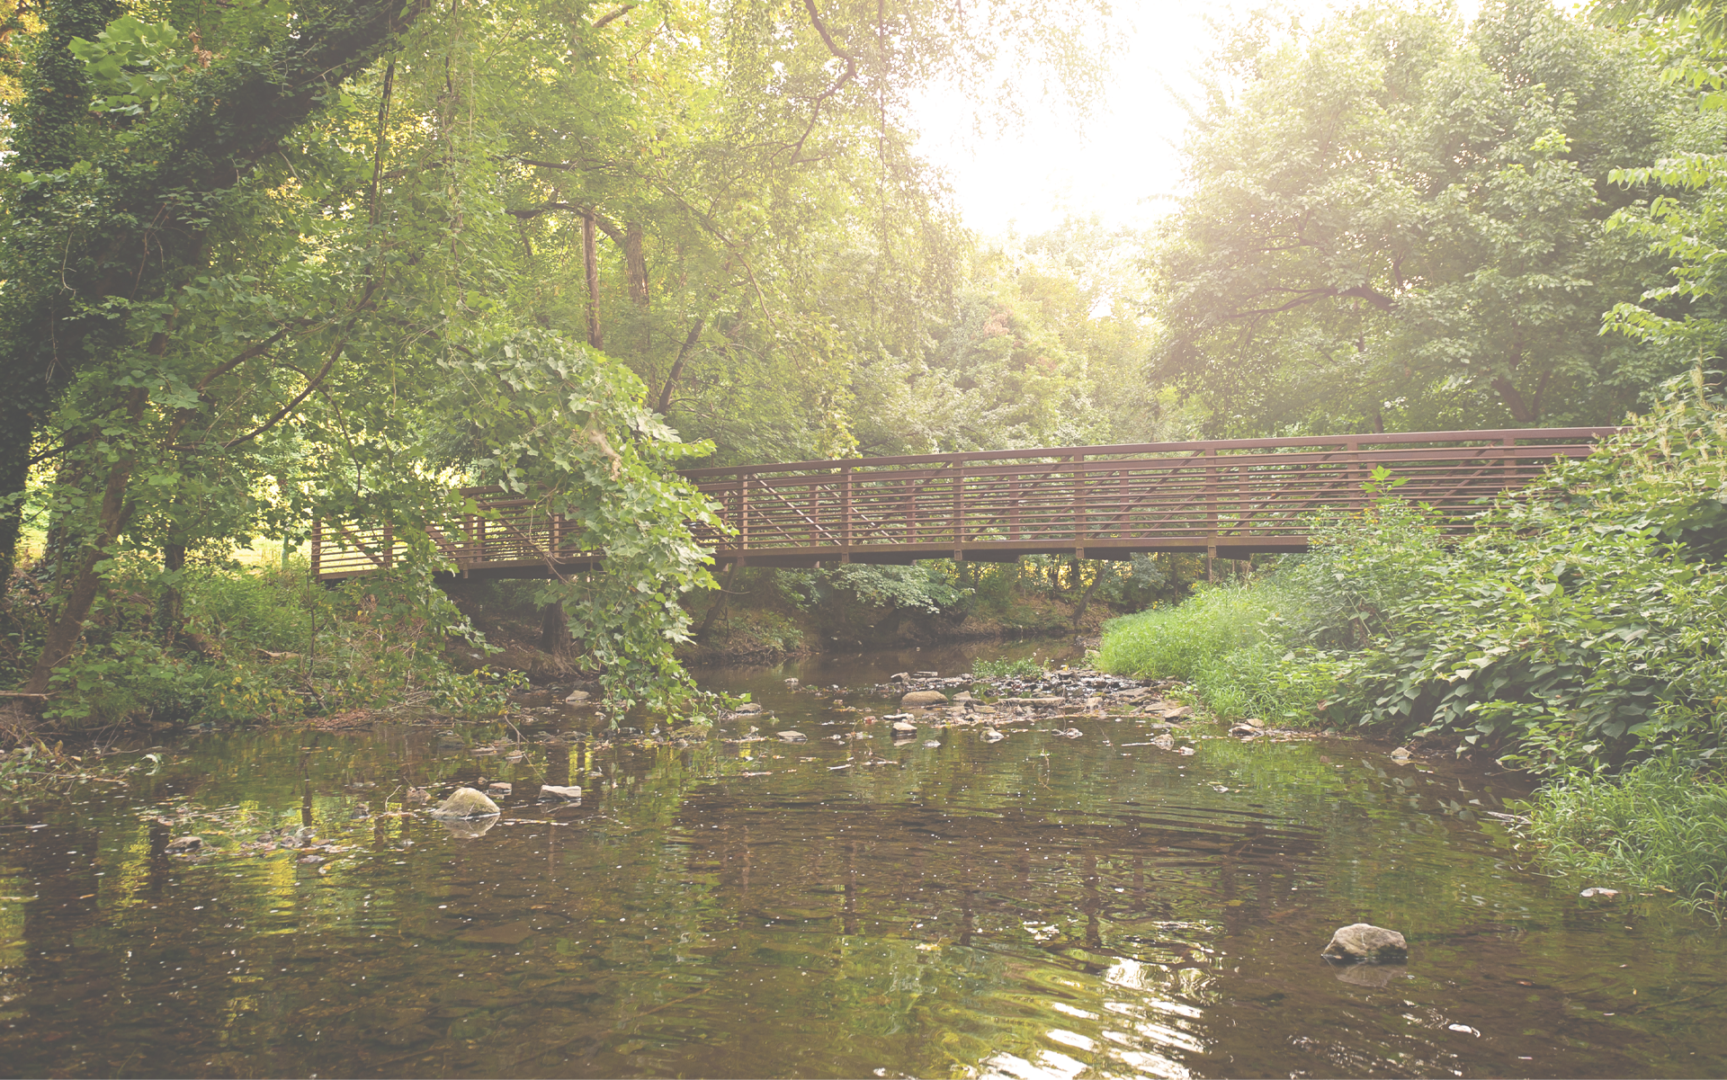 A bridge over water in the middle of a forest.